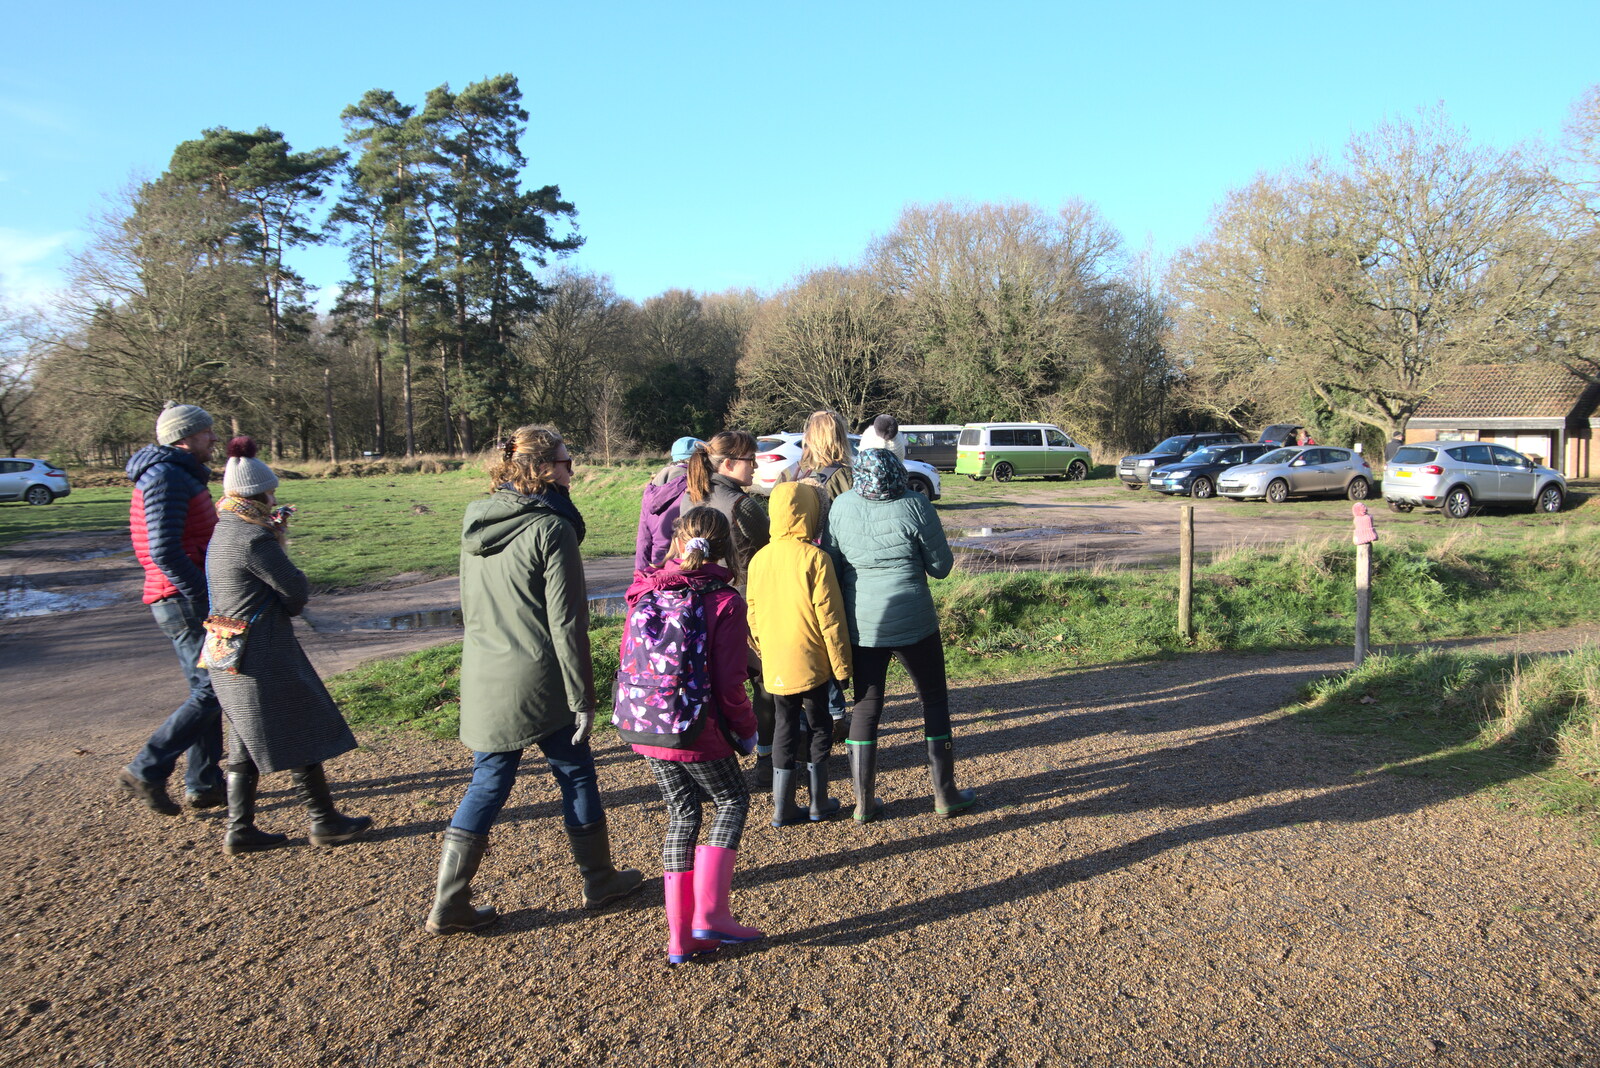 The walkers set off from A Walk Around Knettishall Heath, Thetford, Norfolk - 2nd January 2022